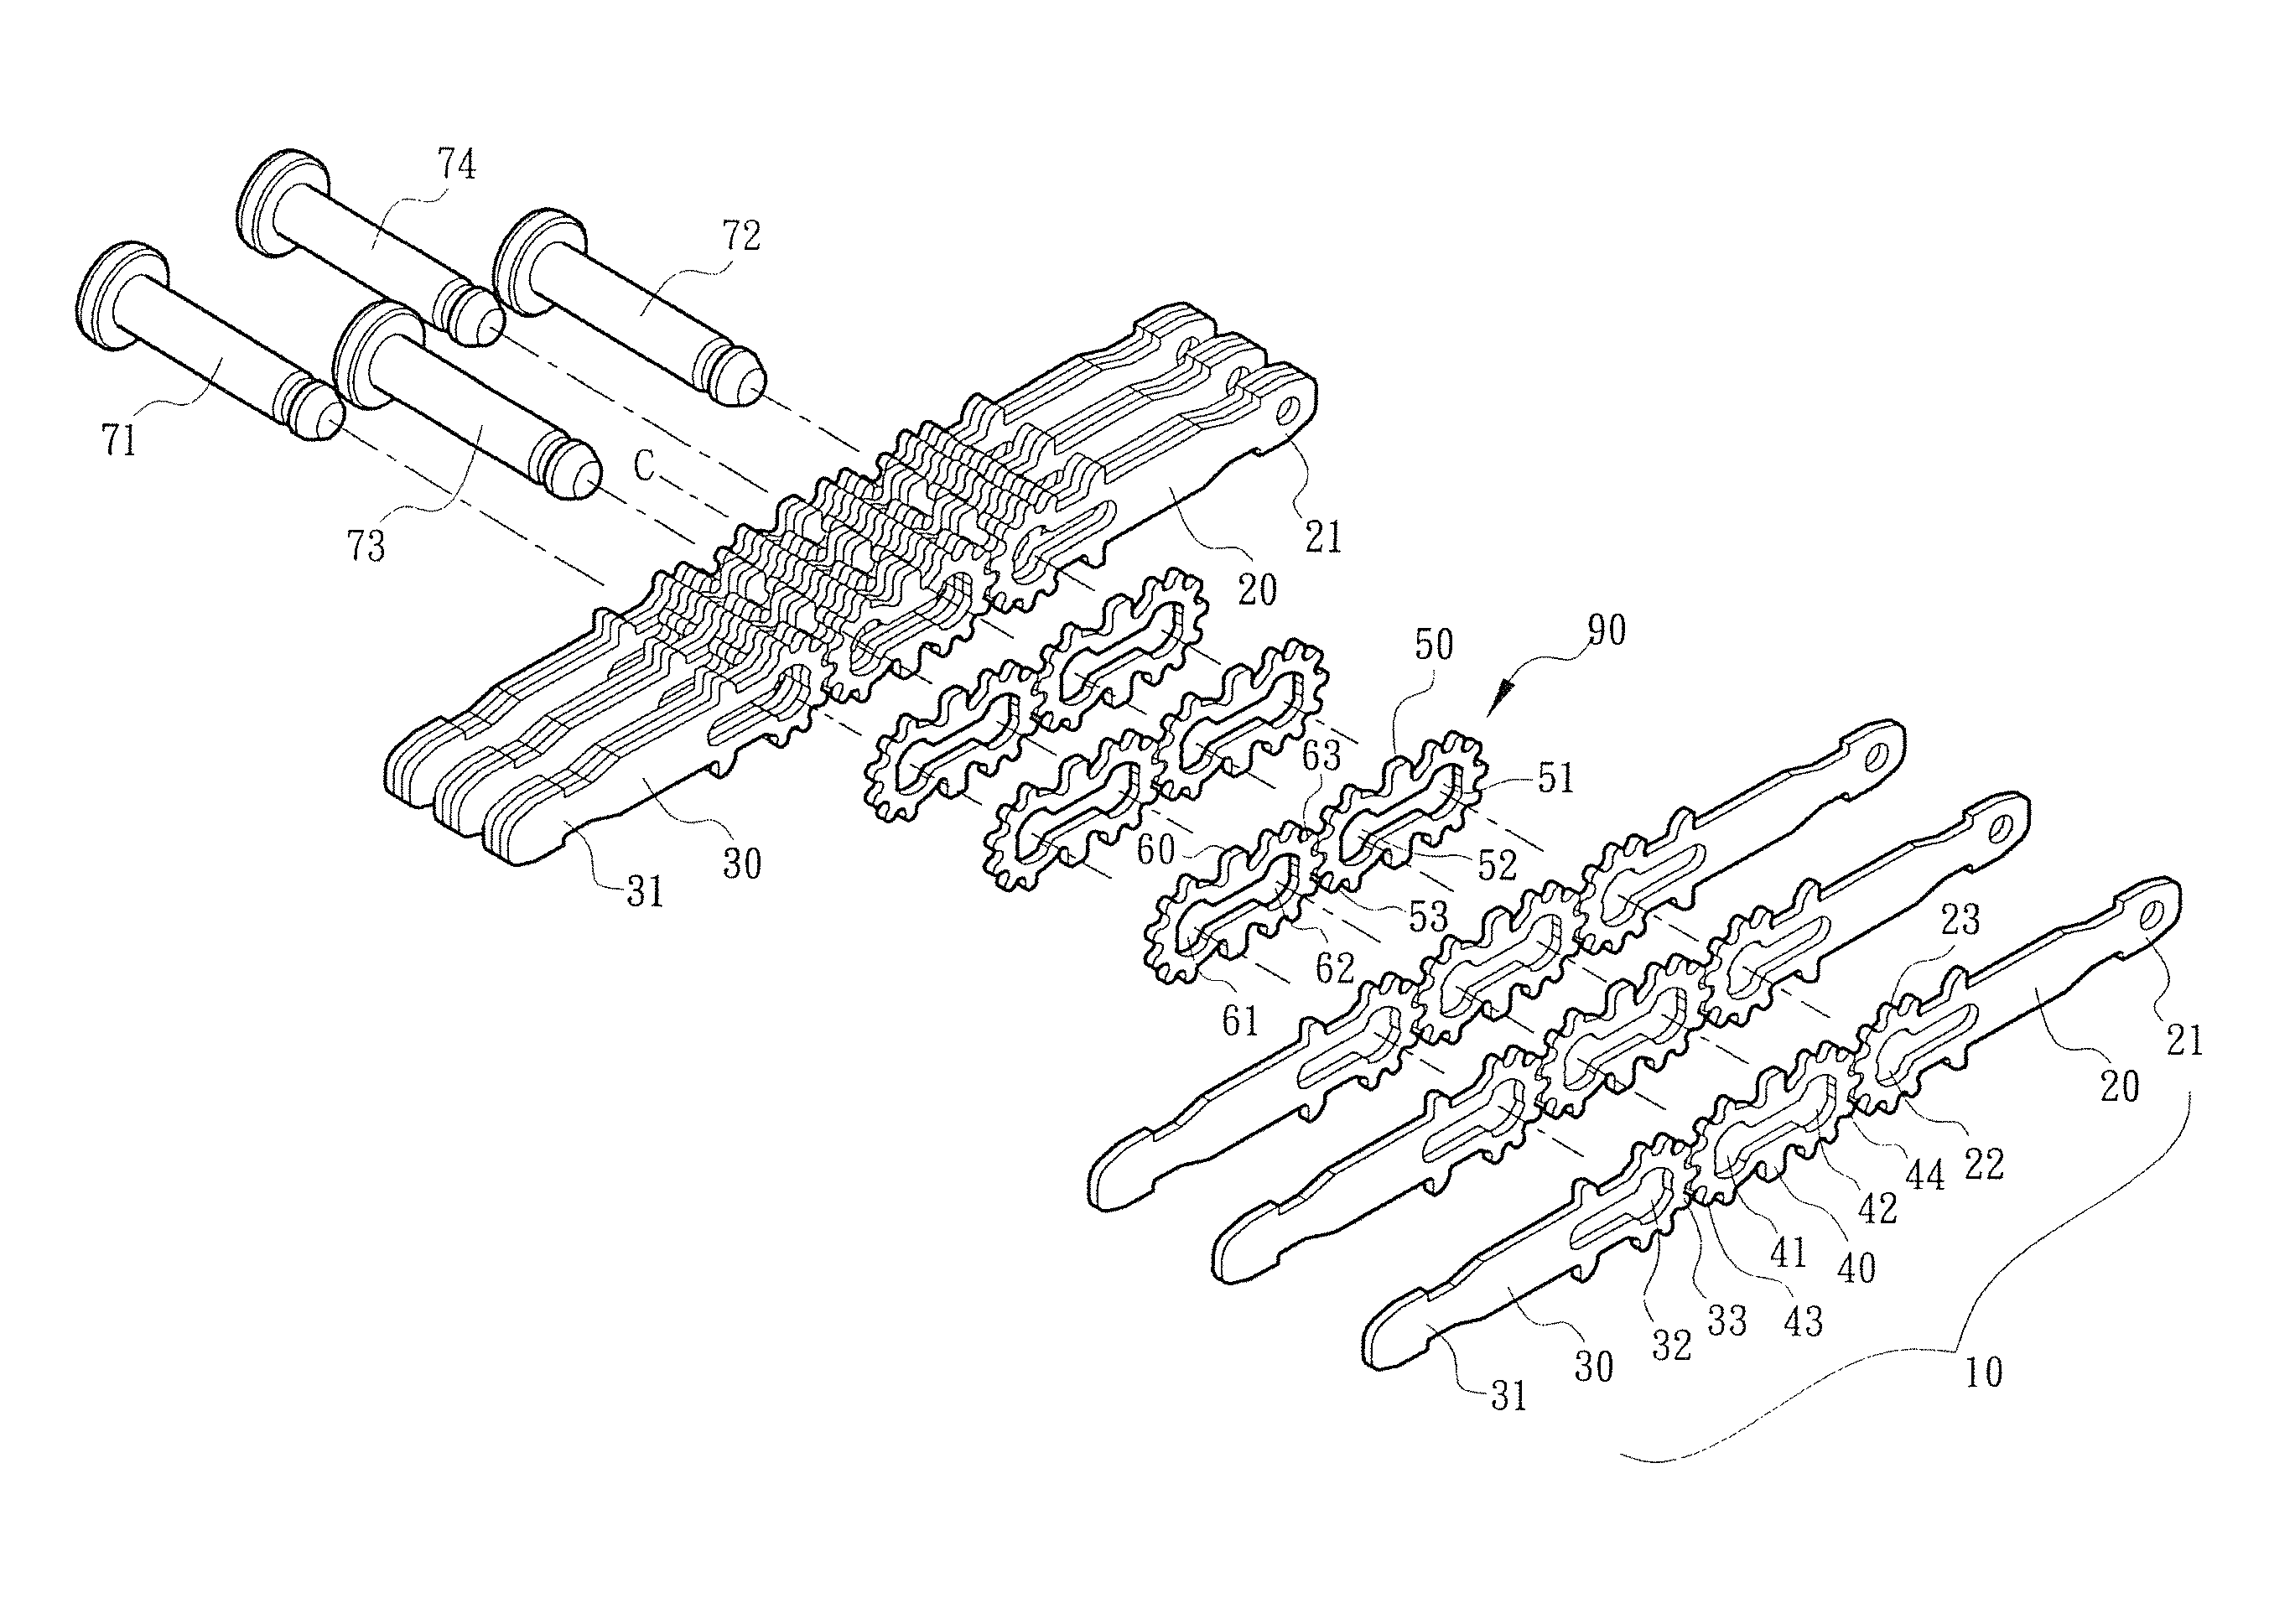 Plug-in connection multi-segment rotary shaft structure